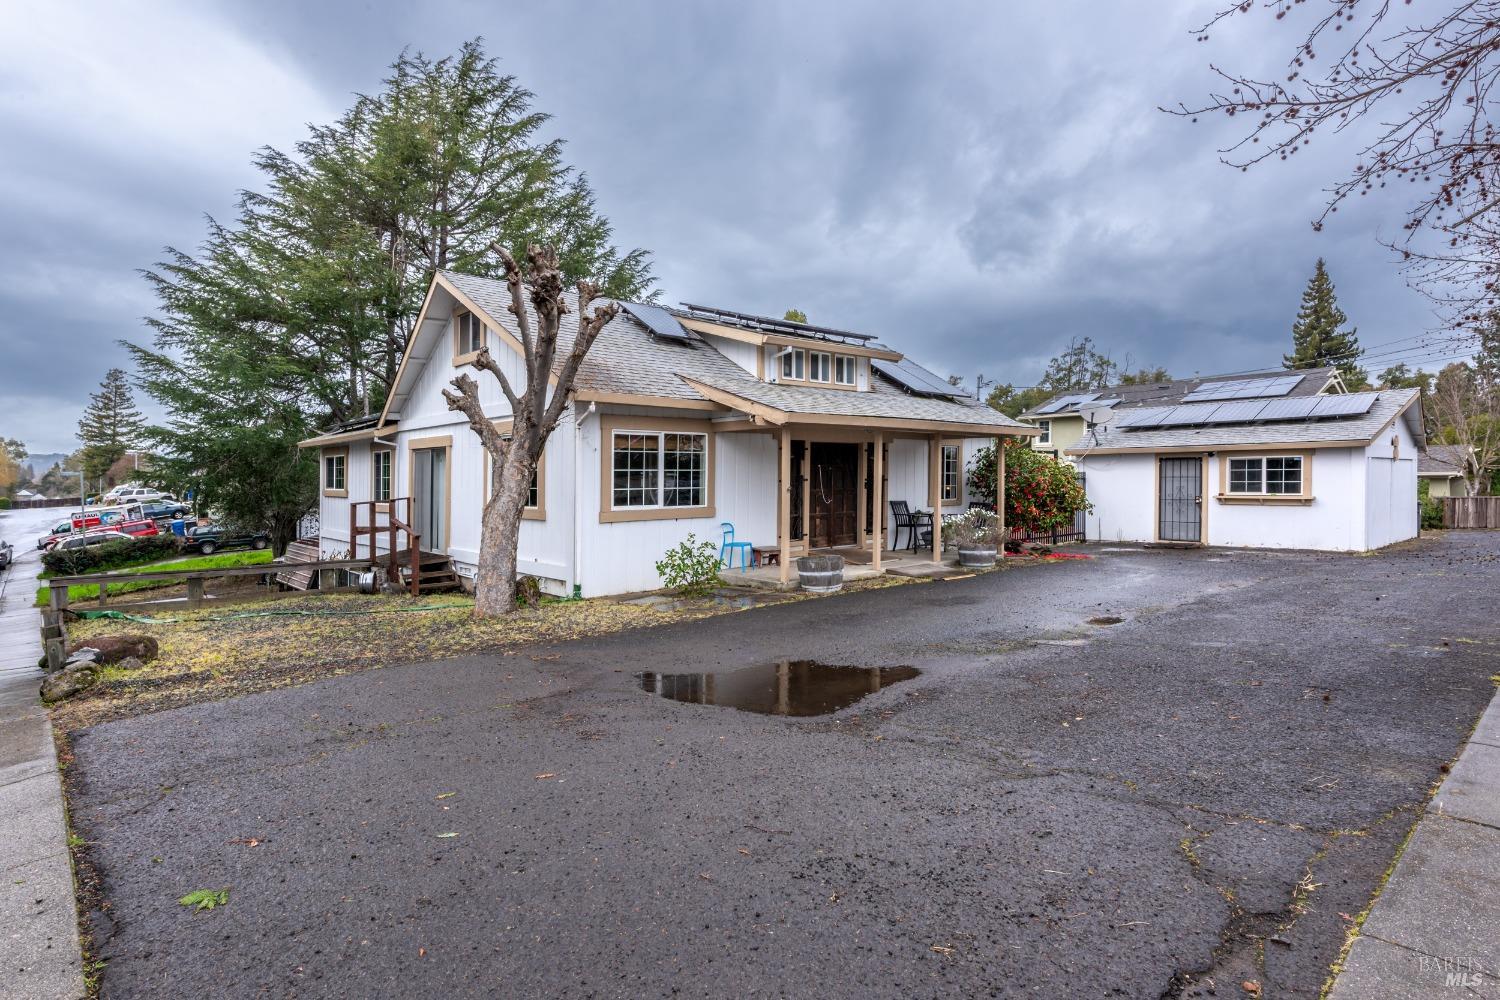 Photo of 1045 Terrace Dr in Napa, CA